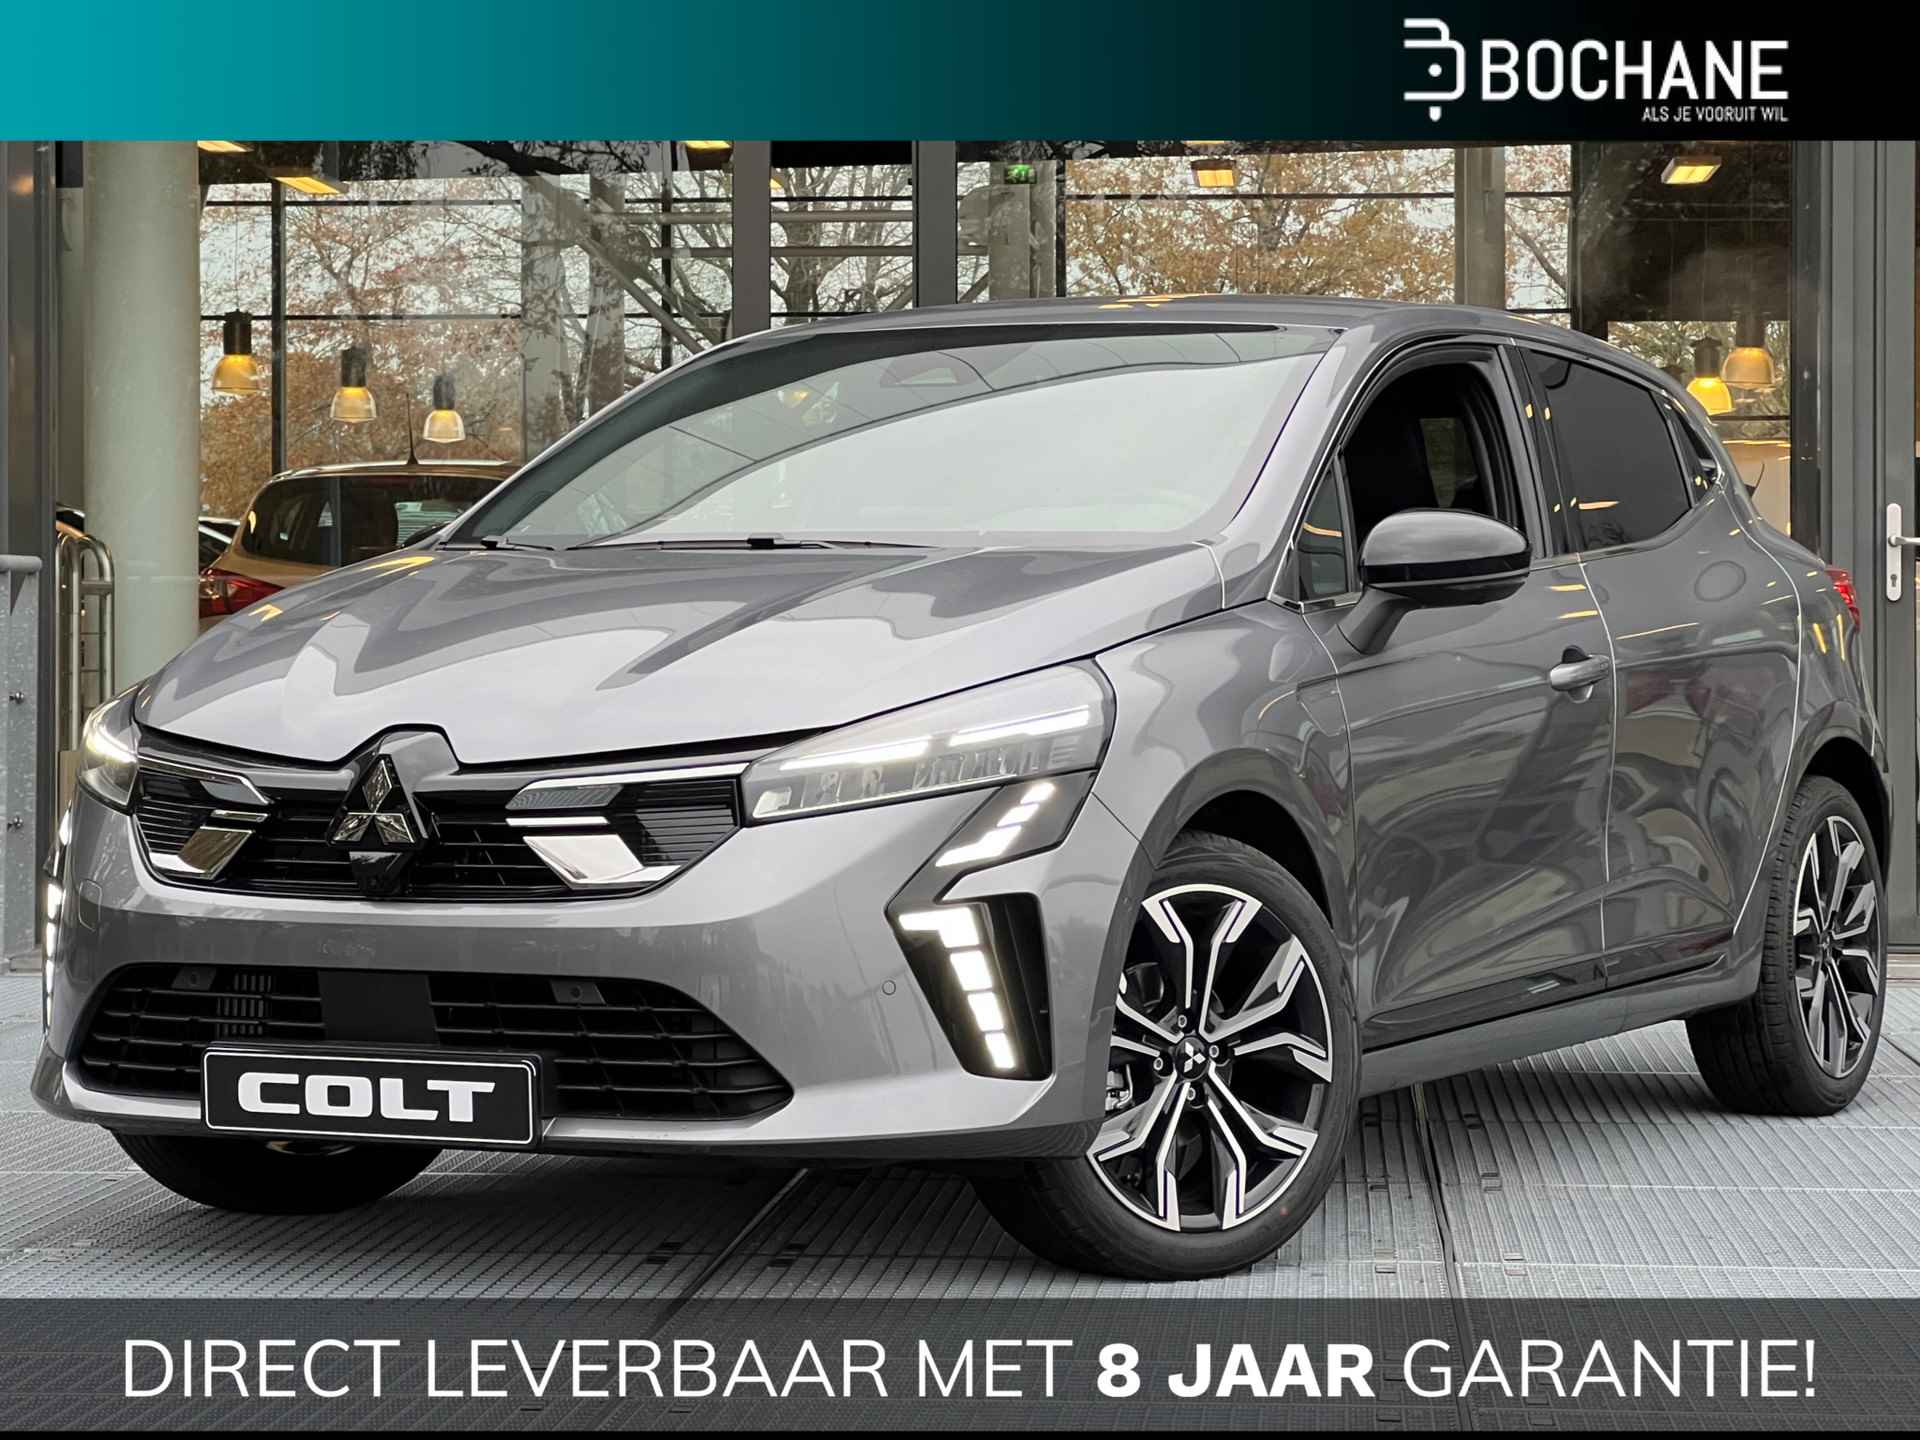 Mitsubishi Colt 1.0T MT Instyle | Draadloos Apple Carplay / Android Auto | Adap. Cruise Control | Climate Control | BOSE | DIRECT UIT VOORRAAD LEVERBAAR! - 1/38